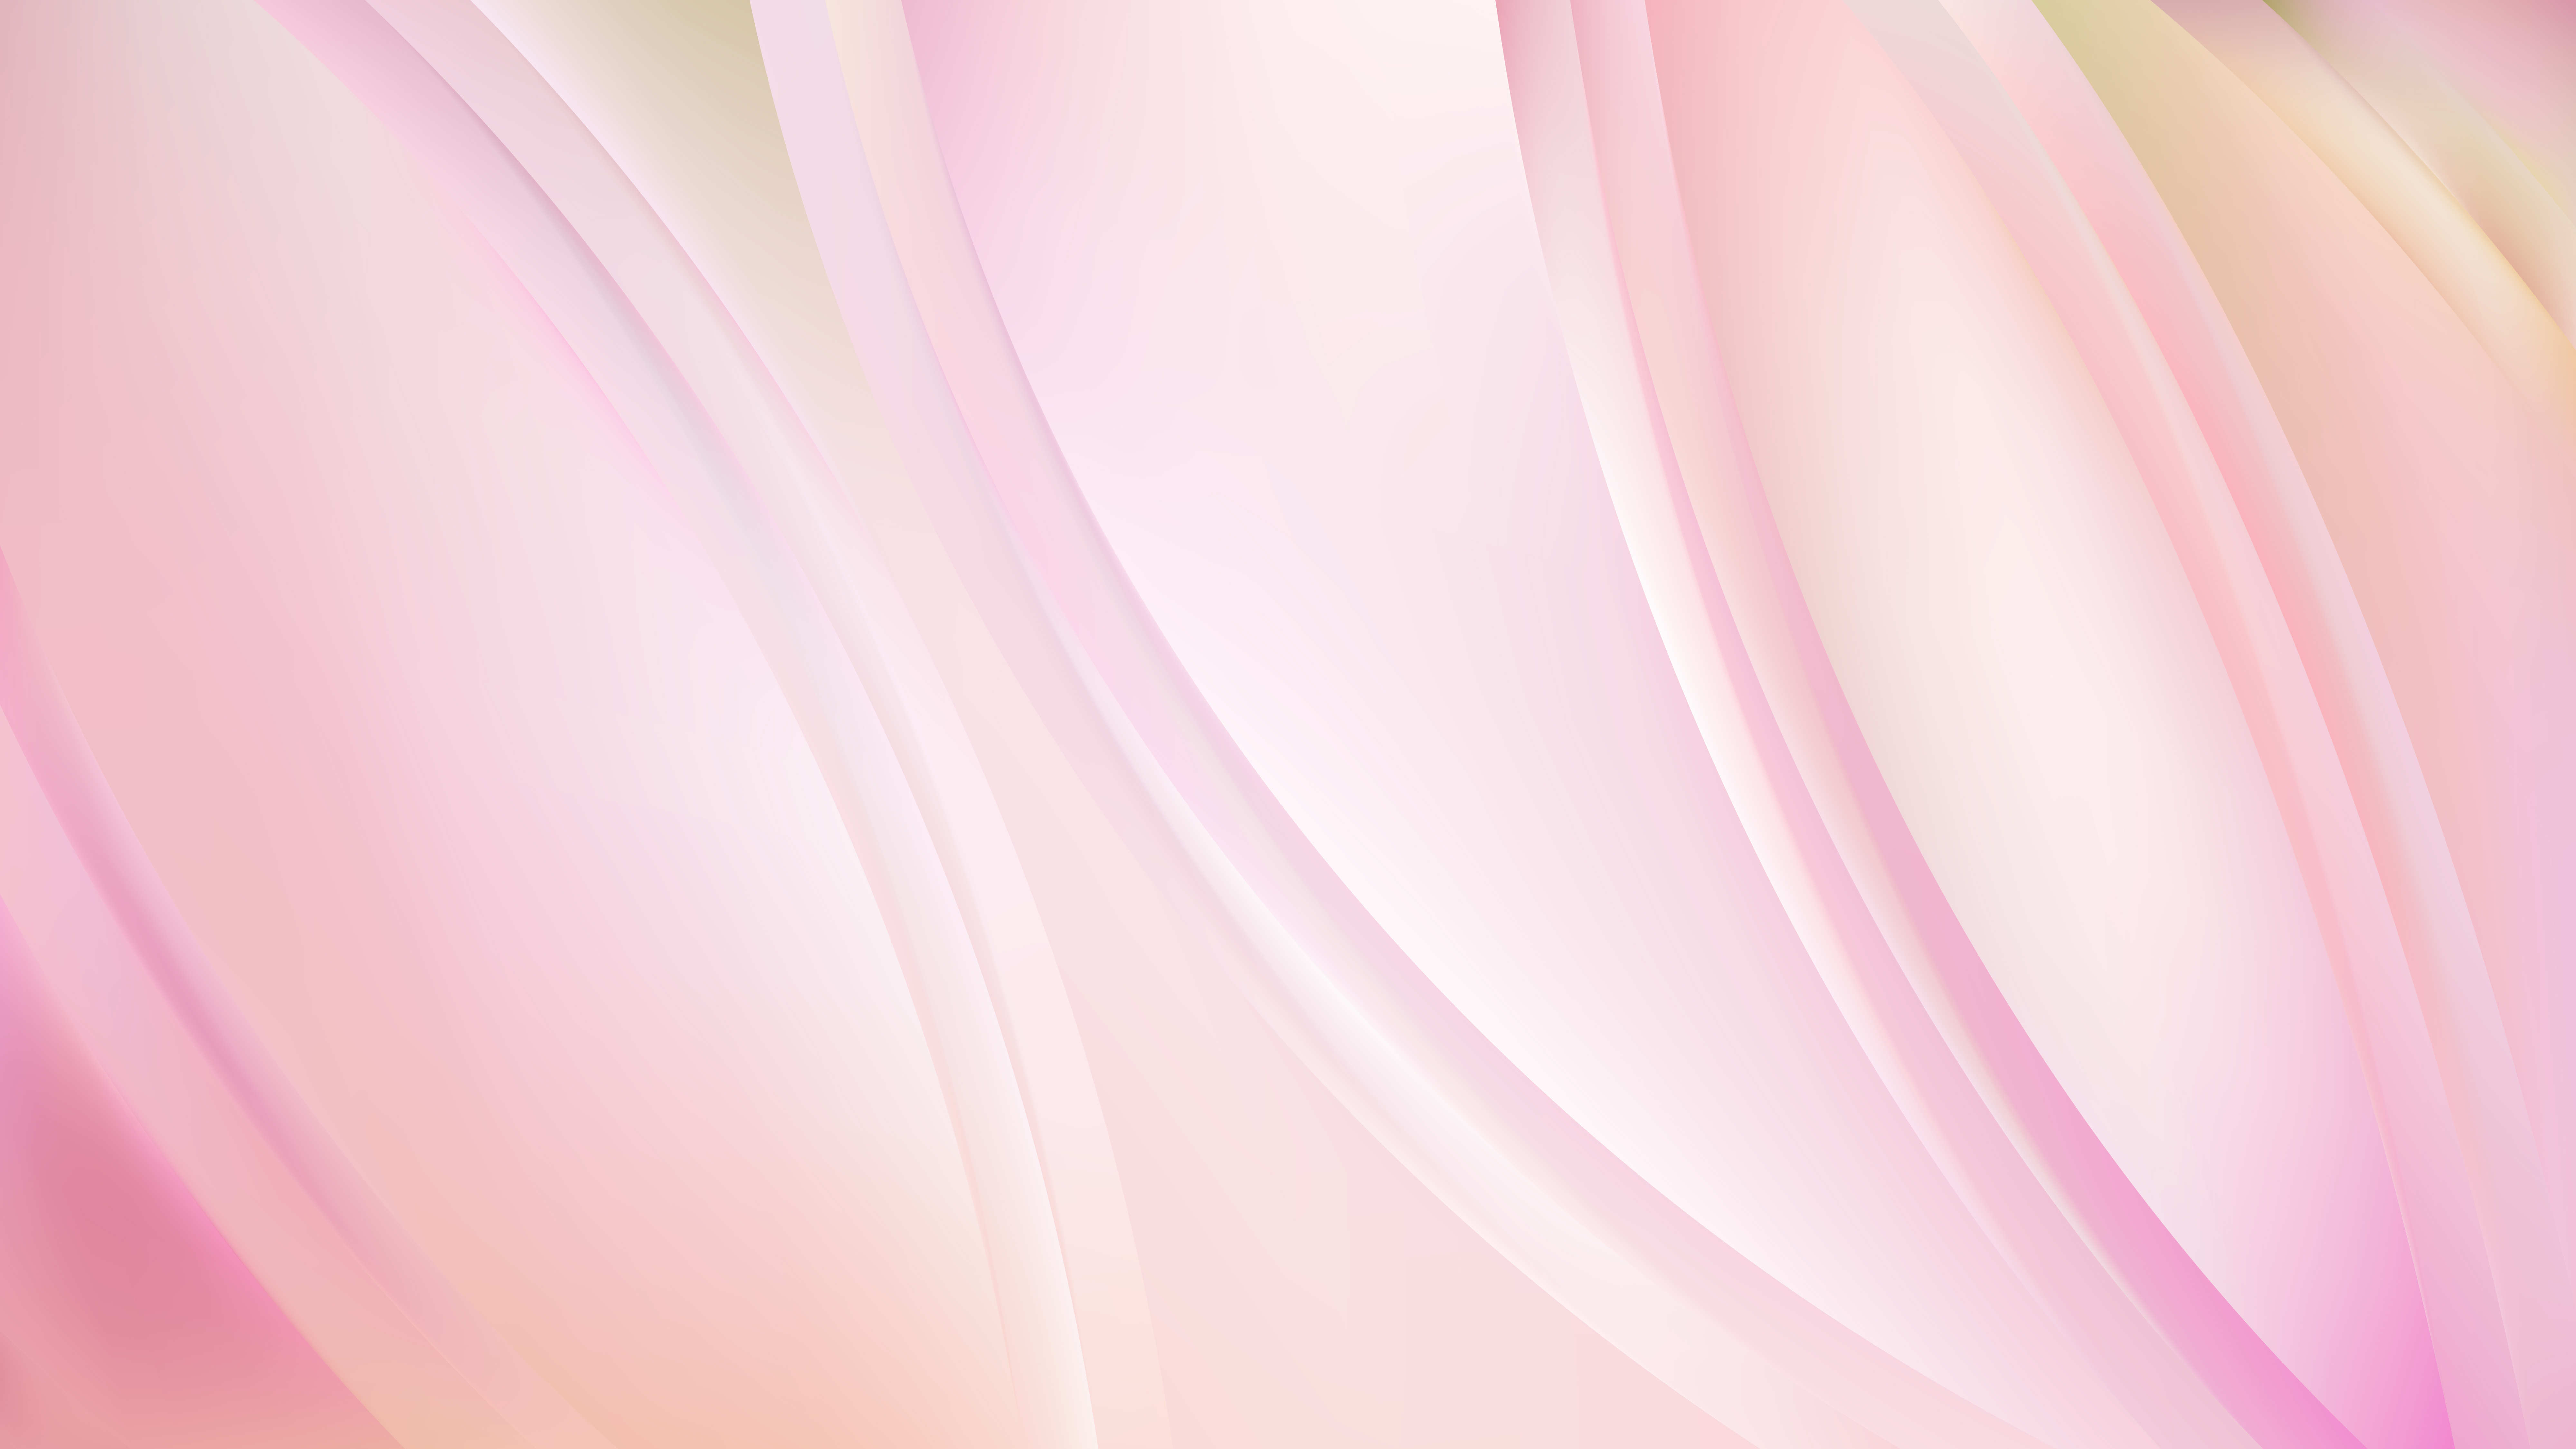 Free pink background - Vector Art